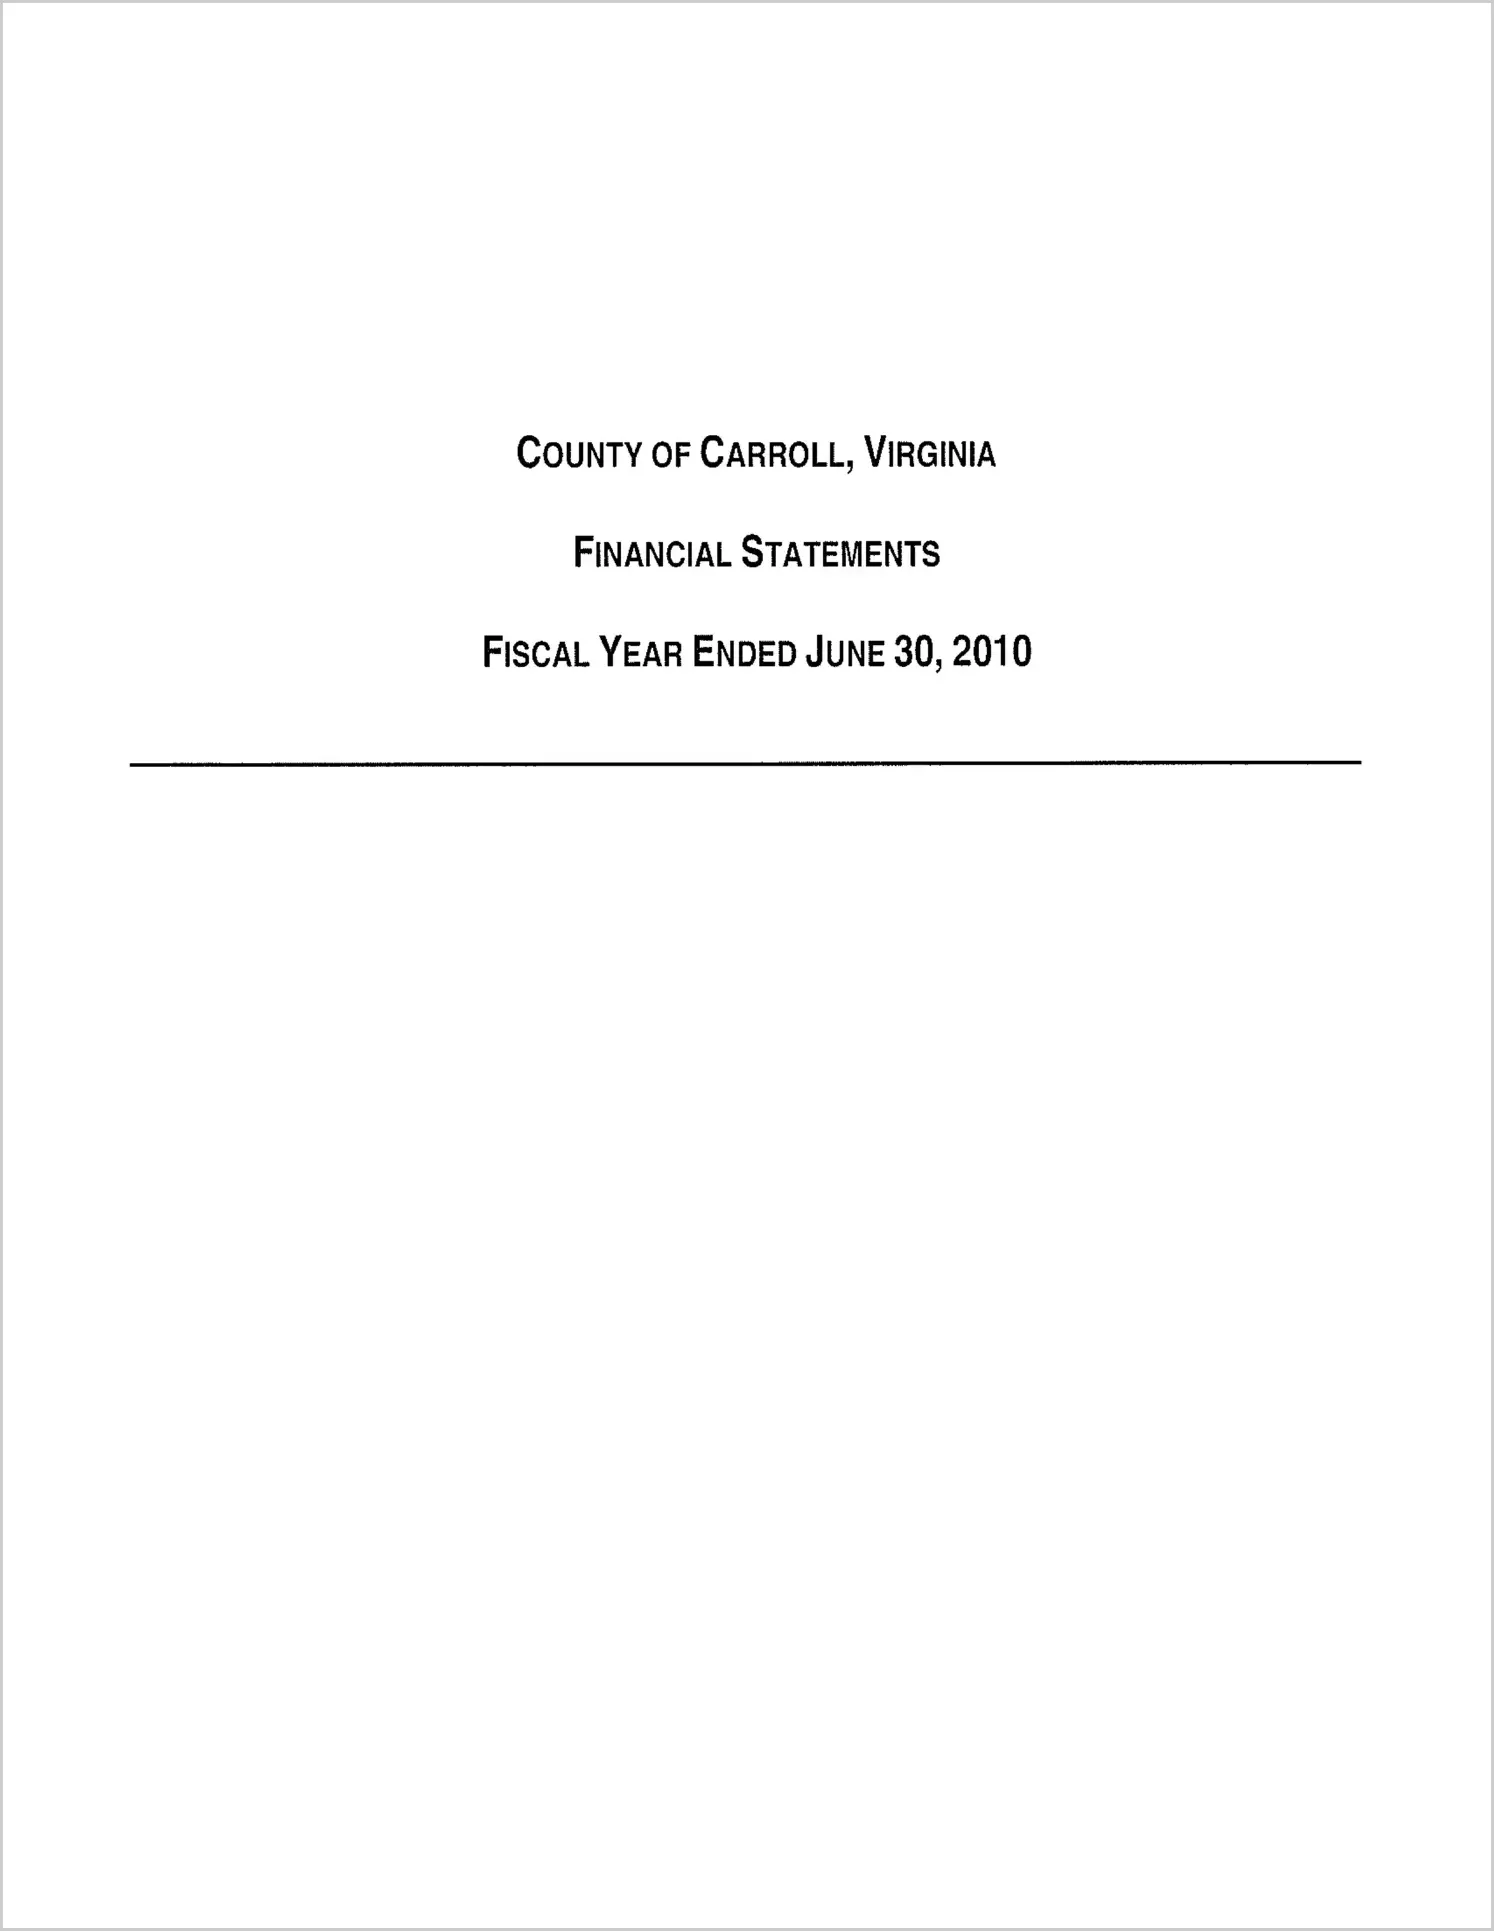 2010 Annual Financial Report for County of Carroll